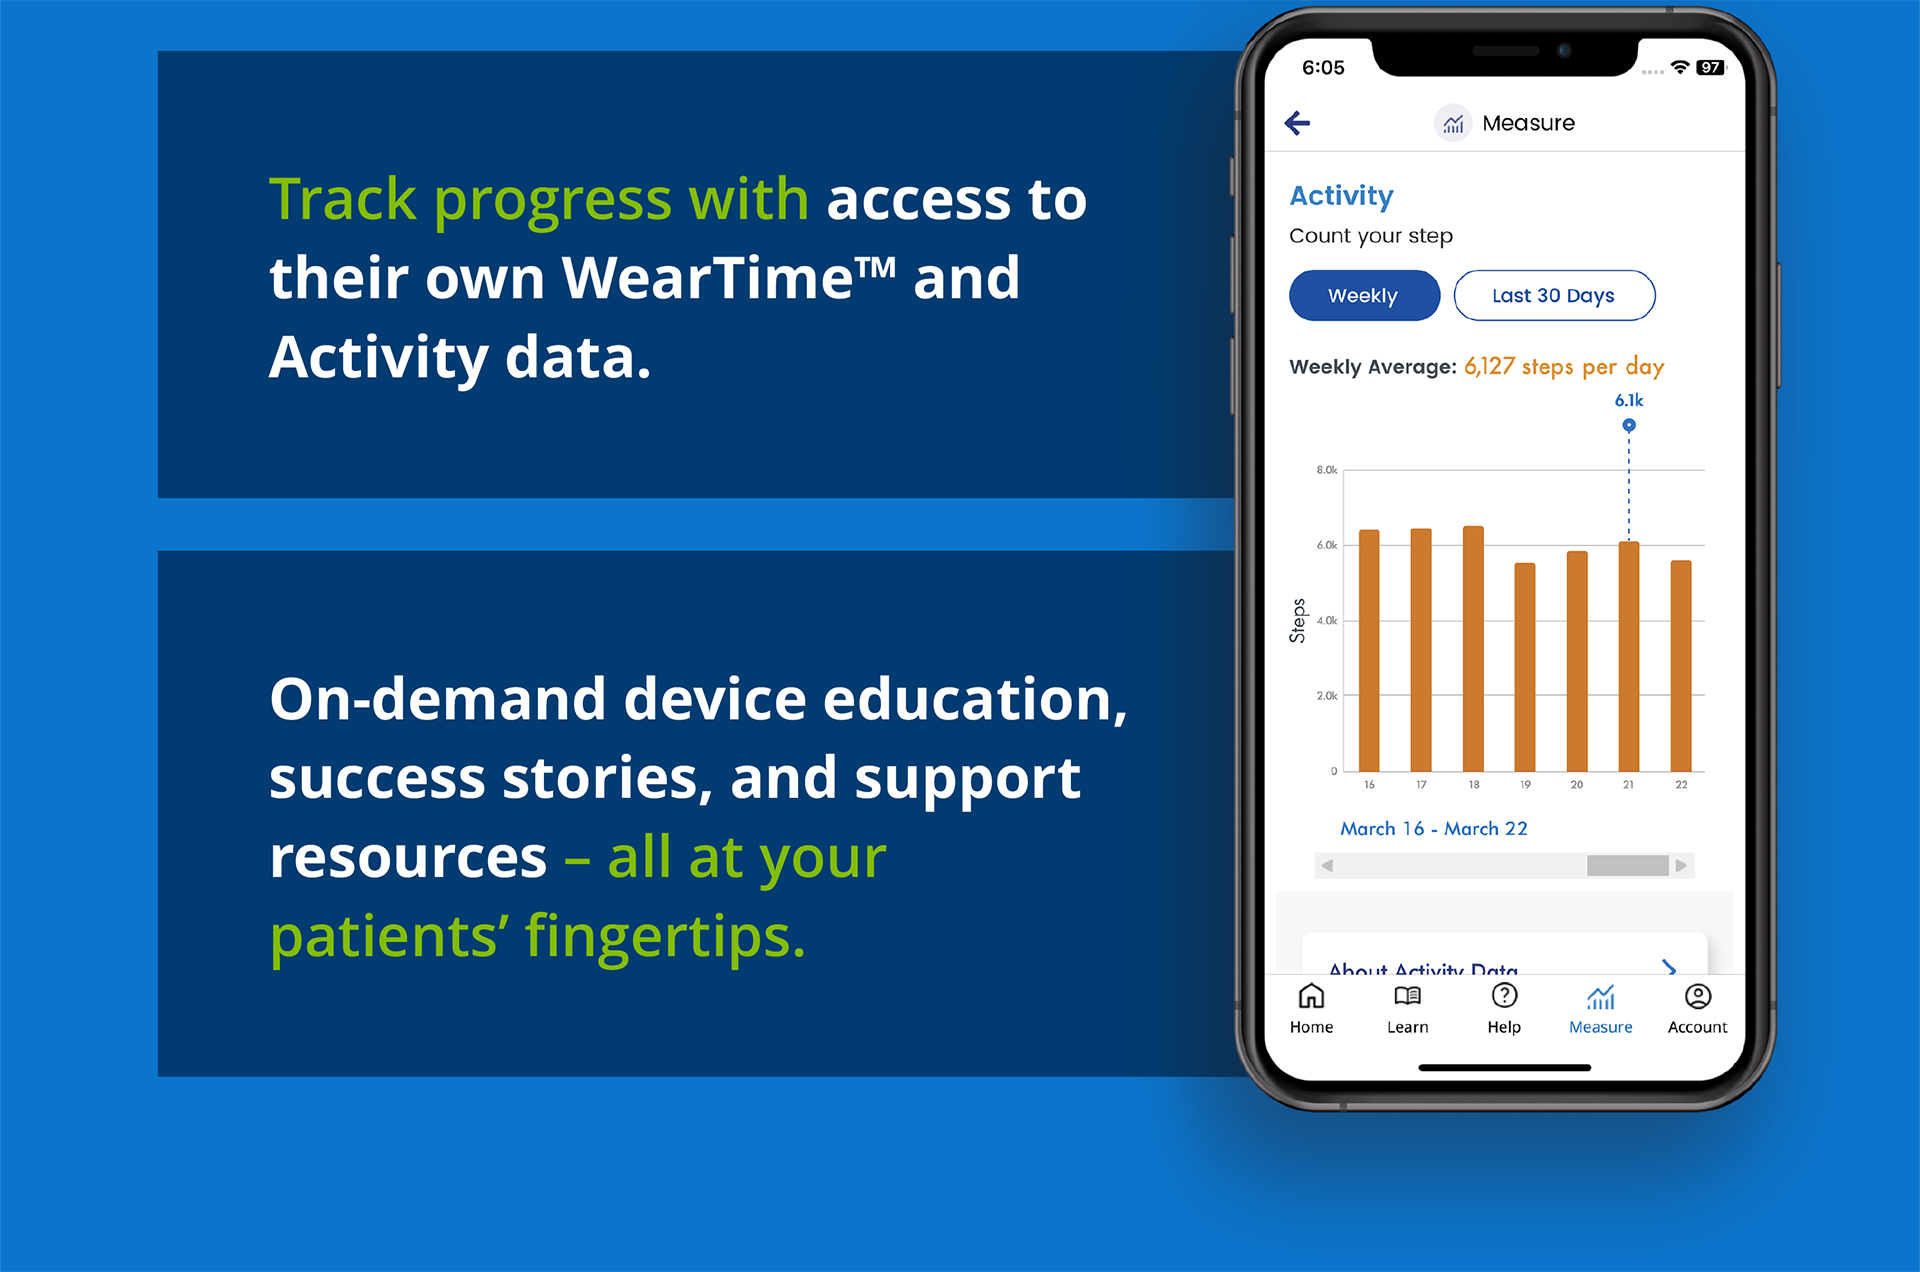 Track progress with access to their own WearTime (TM) and Activity data. On-demand device education, success stories, and support resources - all at your patients' fingertips.